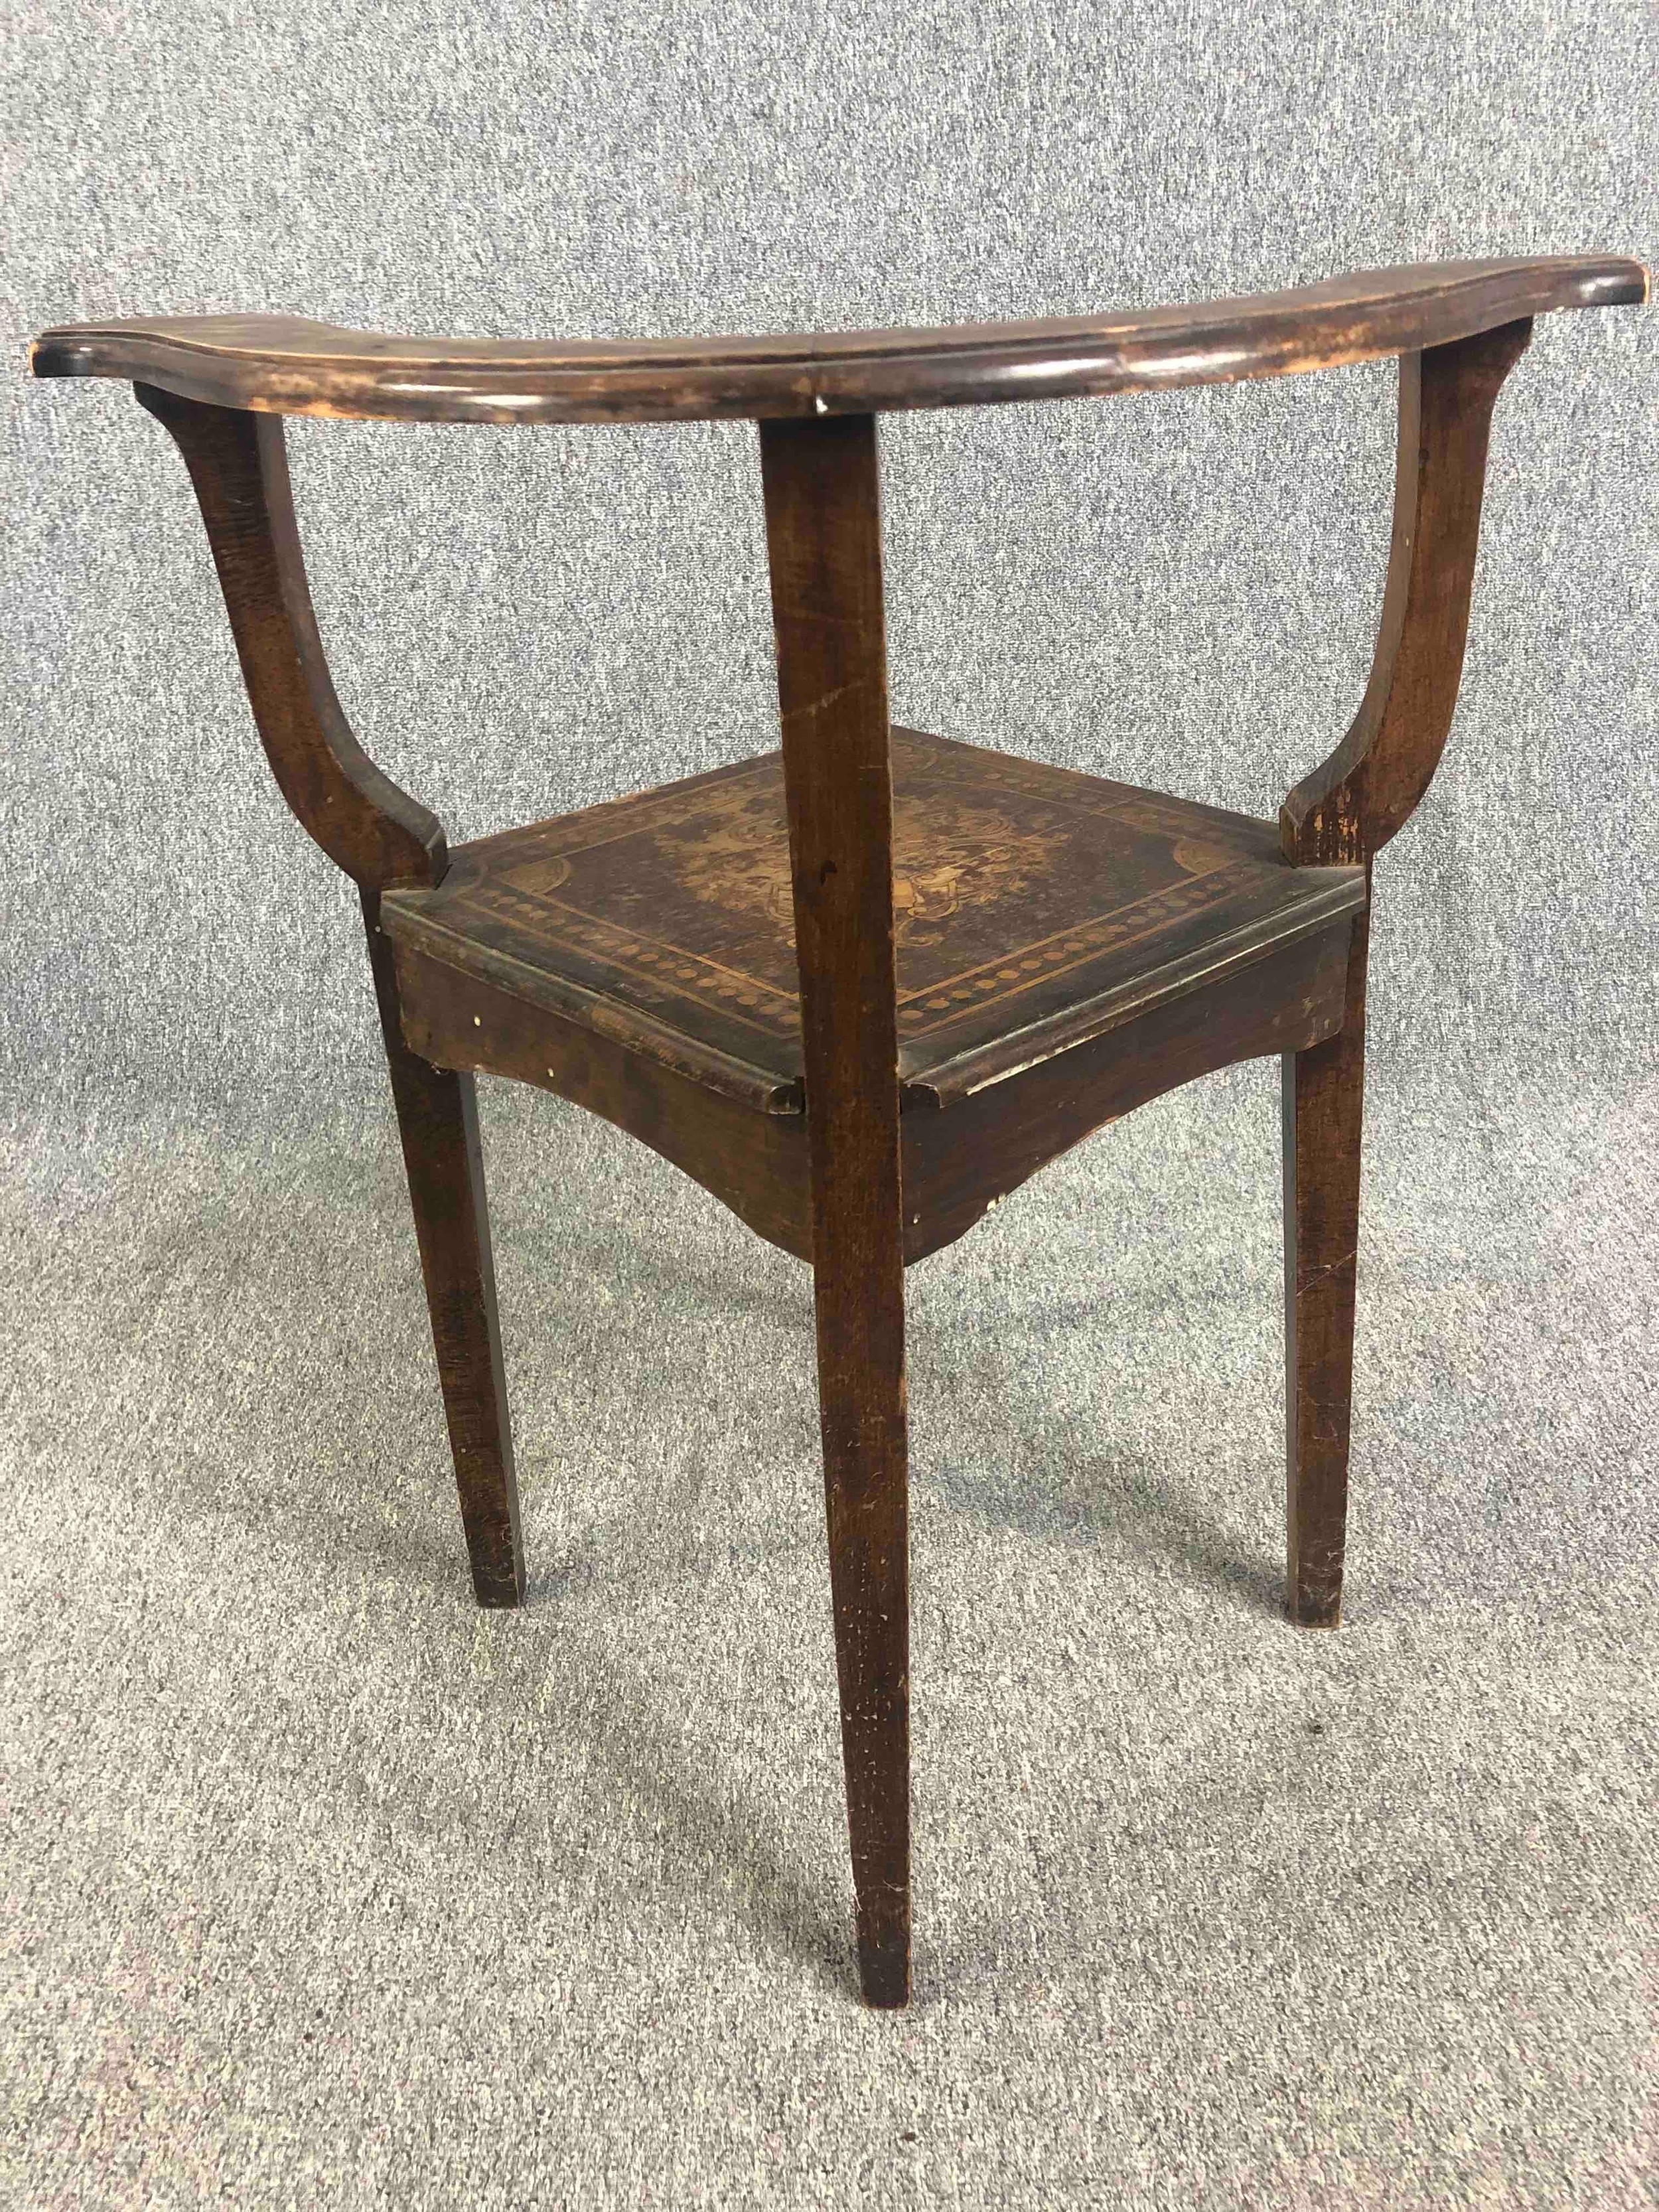 Corner chair, early 19th century oak with all over Classical style and scrolling foliate pen work - Image 4 of 6